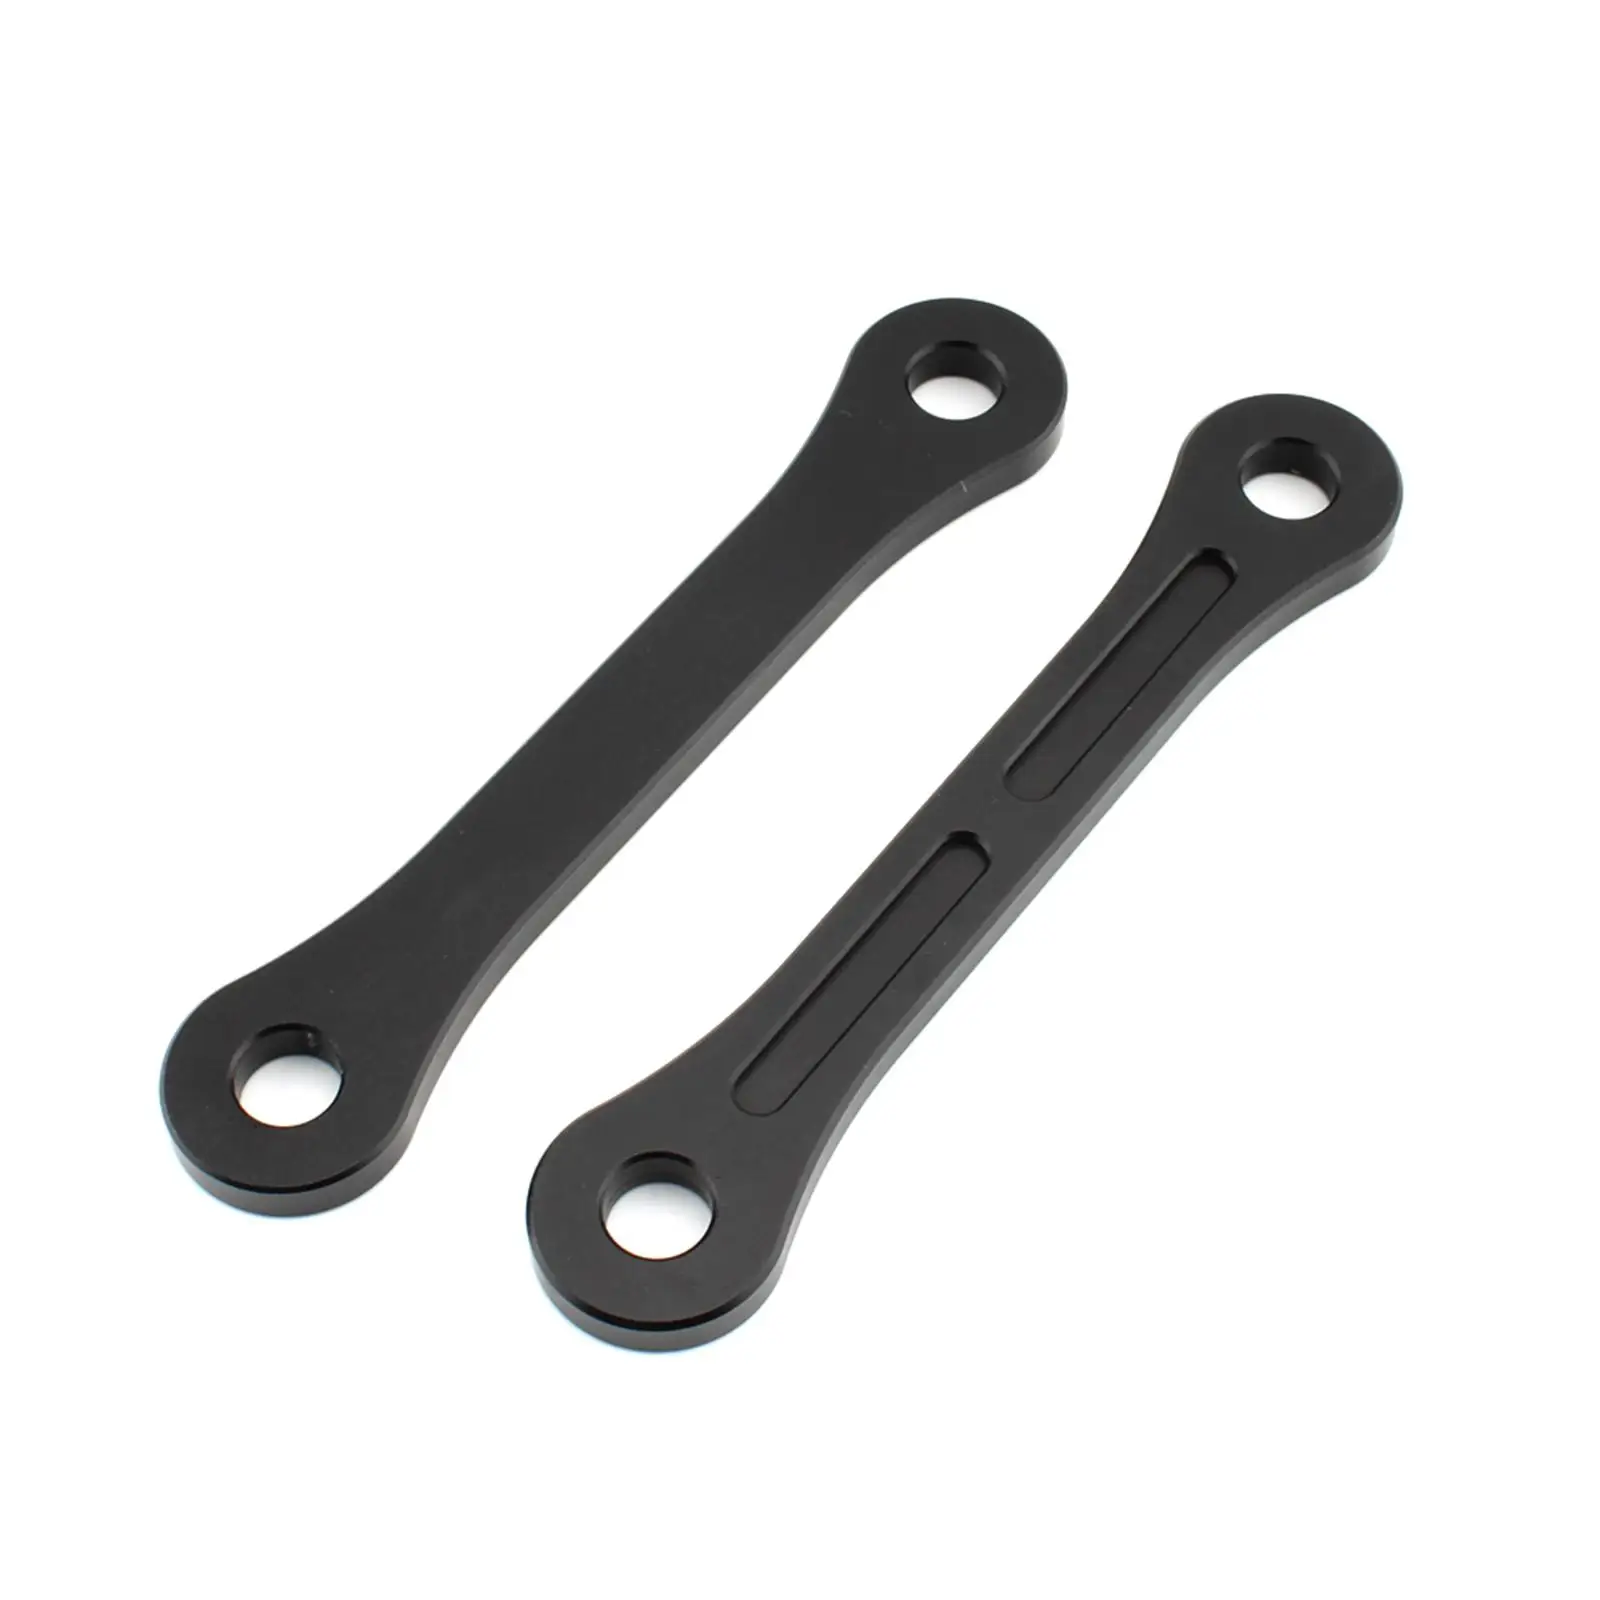 2 Pieces Motorcycle Lowering Drop Linkage Sturdy Aluminum Alloy 35mm Lowering